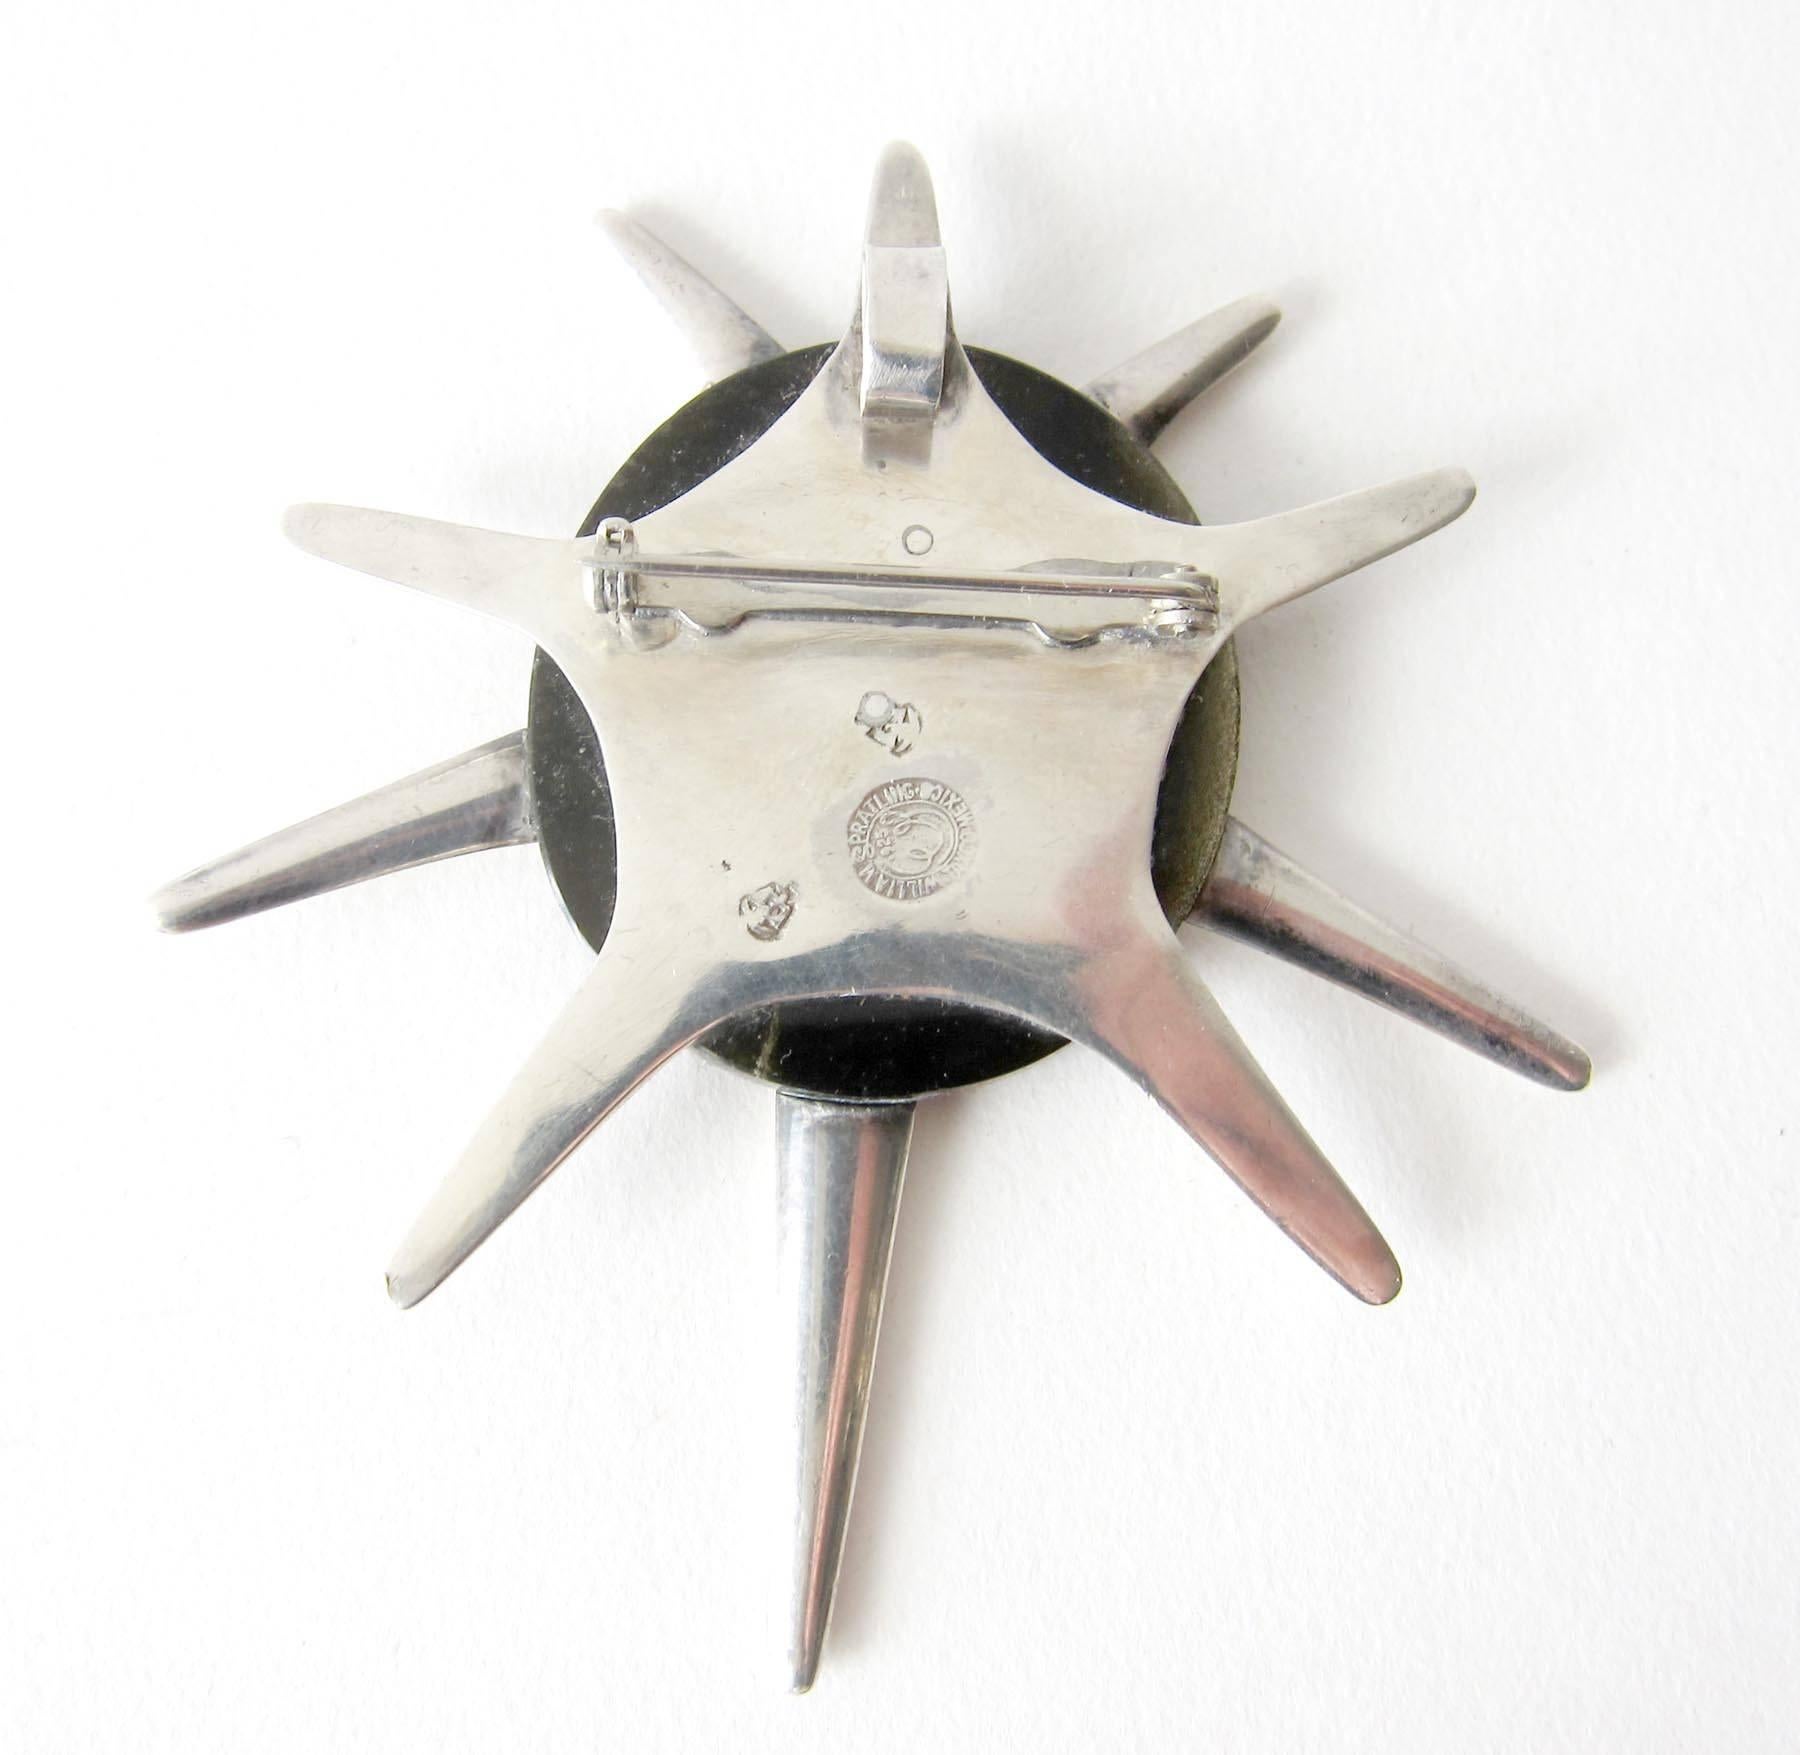 1950's Sterling silver with green obsidian star pendant or brooch created by William Spratling of Taxco, Mexico.  Pendant measures 3.25